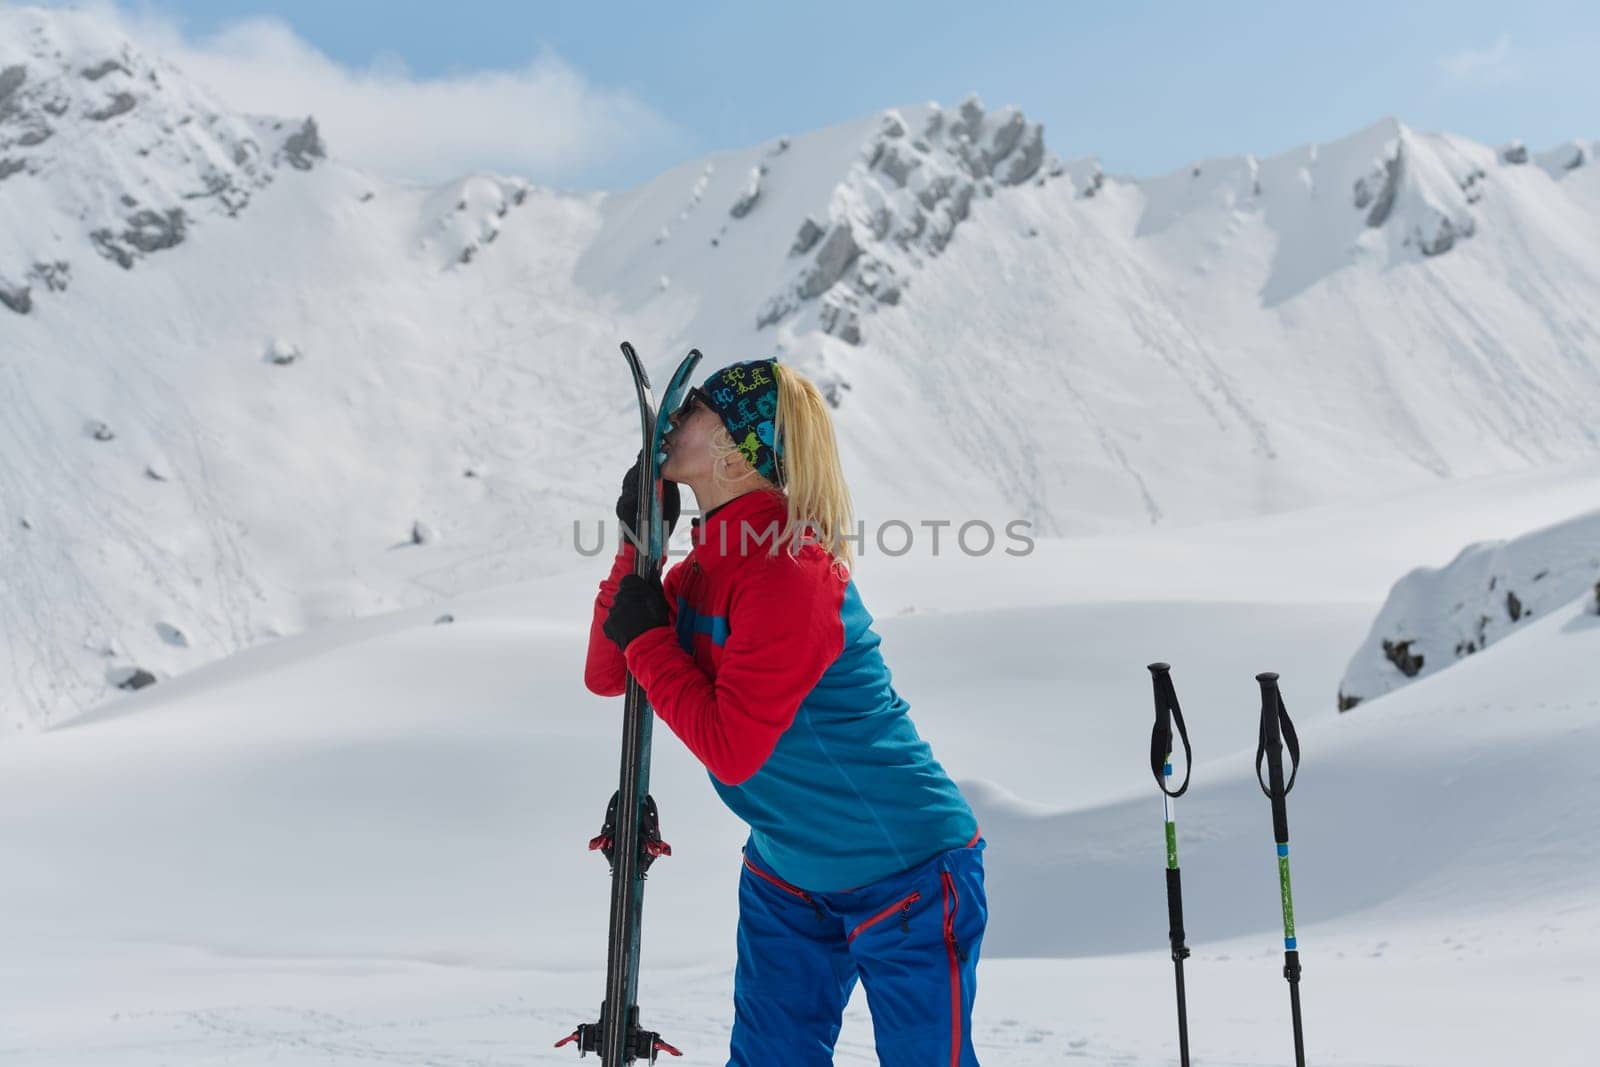 In a powerful display of triumph, a skilled female skier savors her hard-earned victory atop the majestic snowy peaks of the Alps, symbolically licking her skis after conquering a challenging ascent